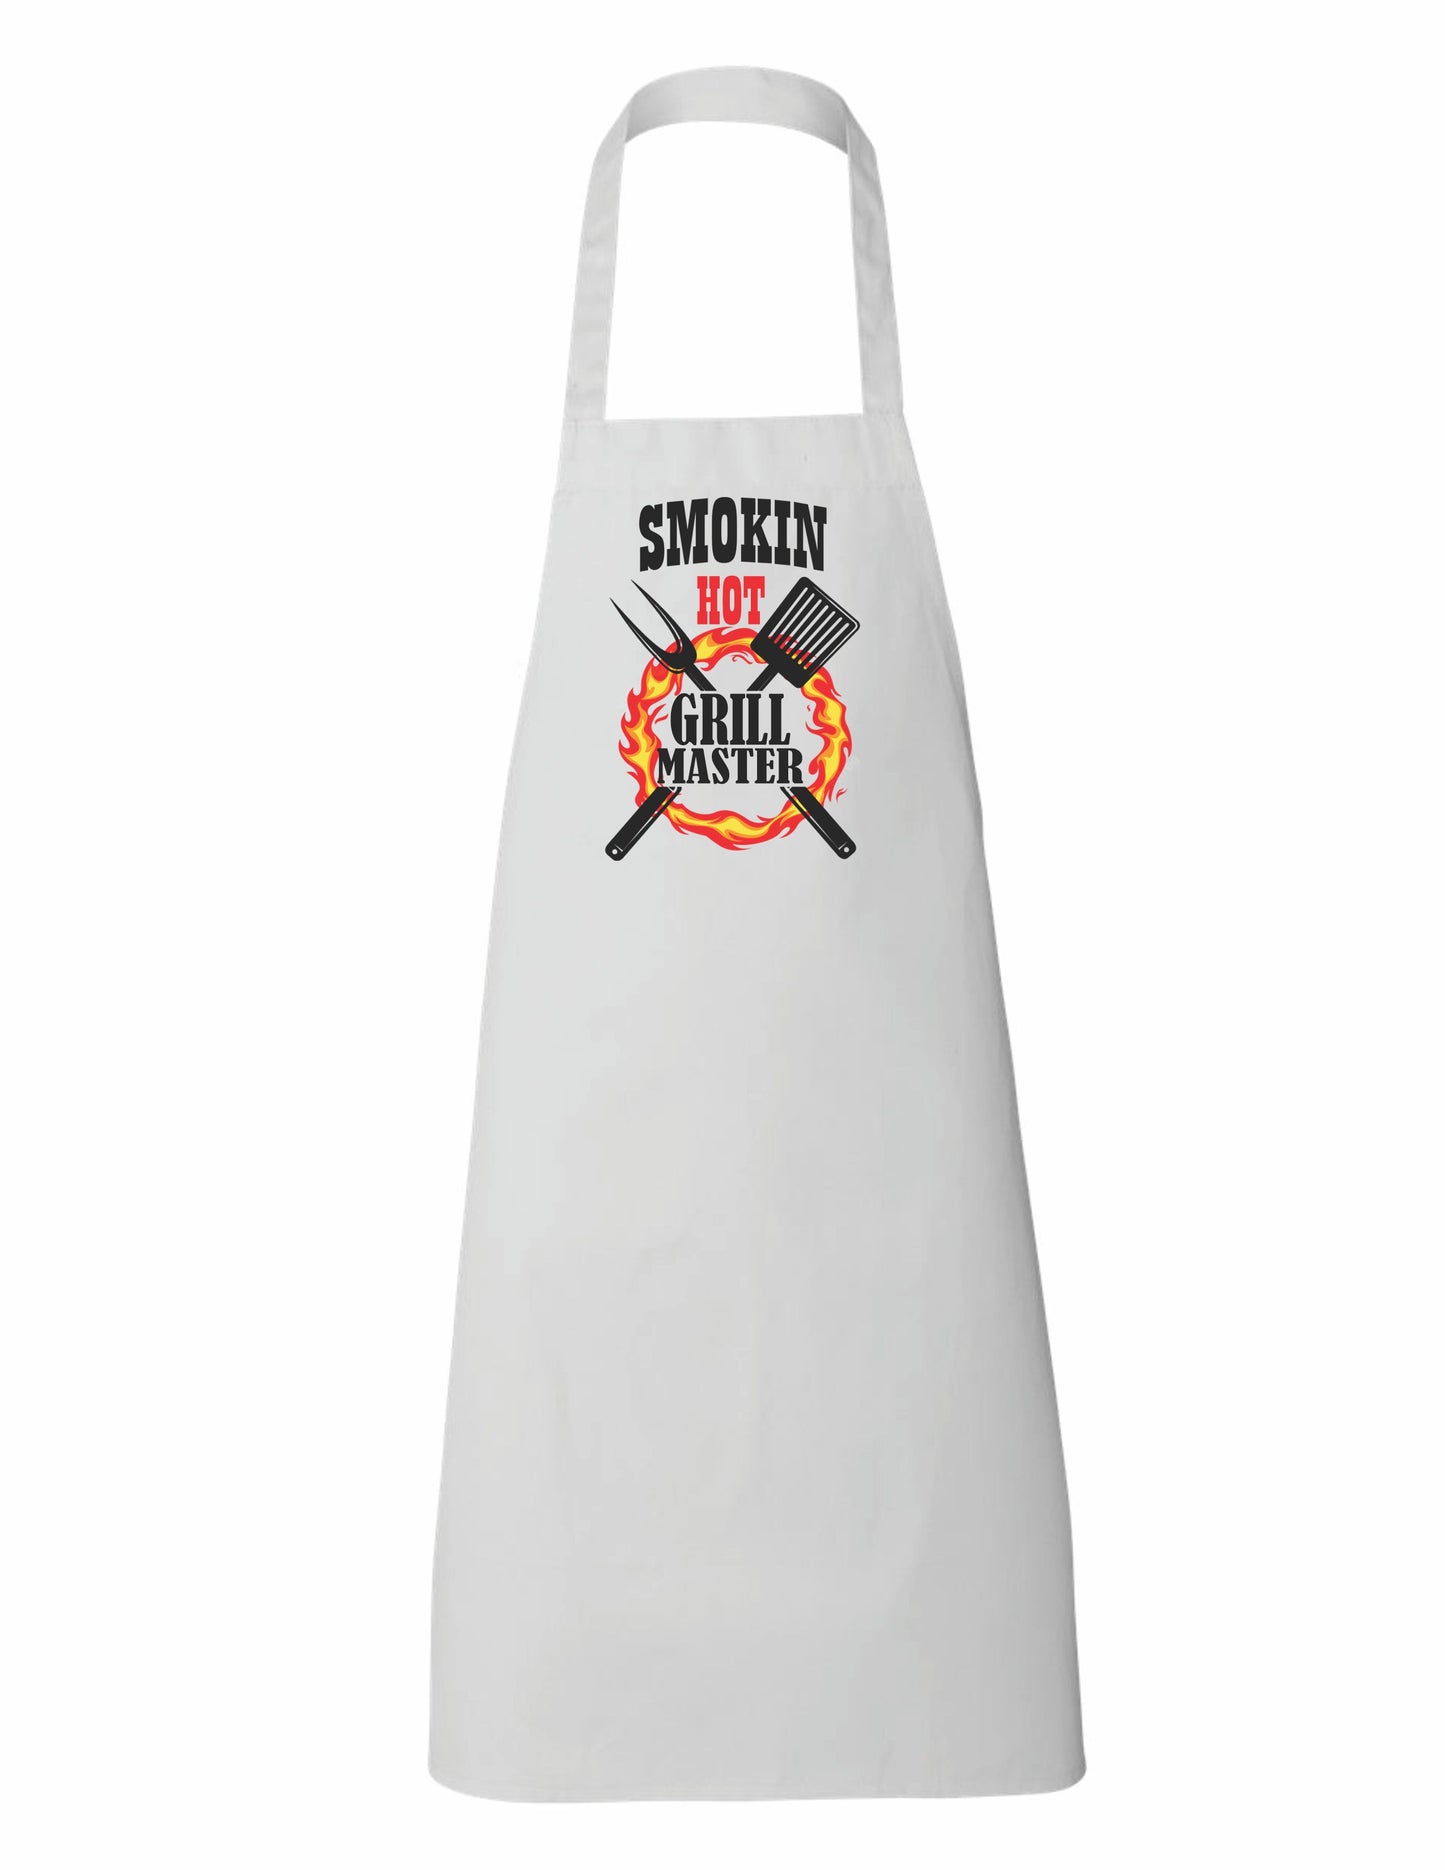 Smokin hot grill master personalized apron A great and unique idea for father’s day or mother's day gift